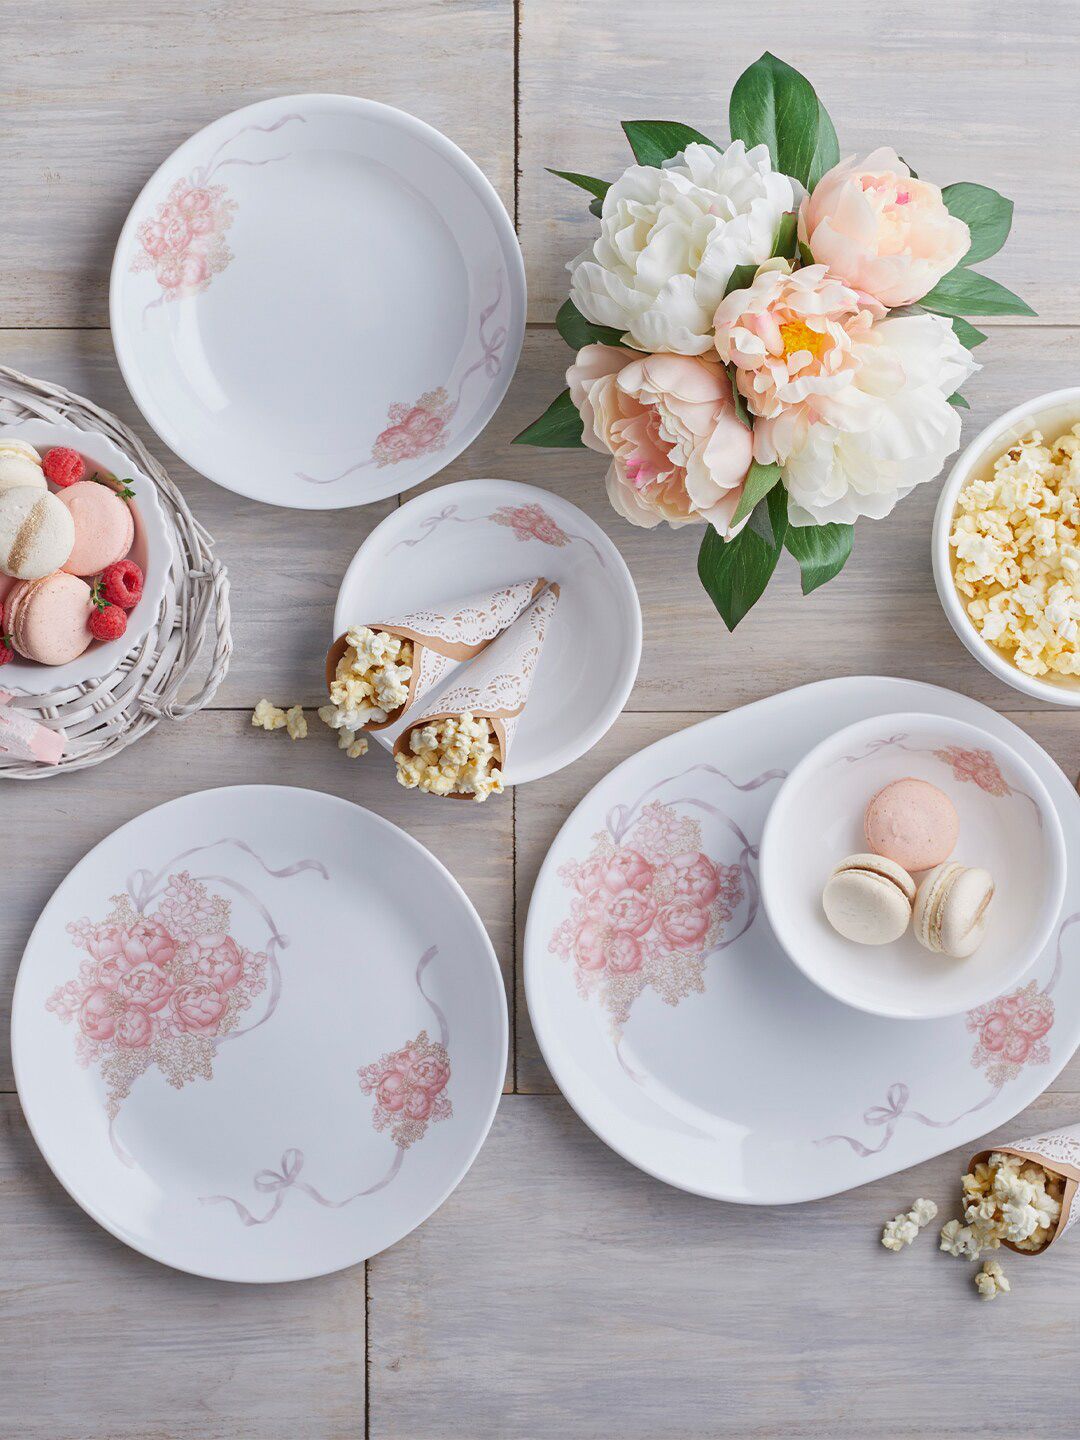 Corelle White & 6 Pieces Floral Printed Matte Plates Price in India